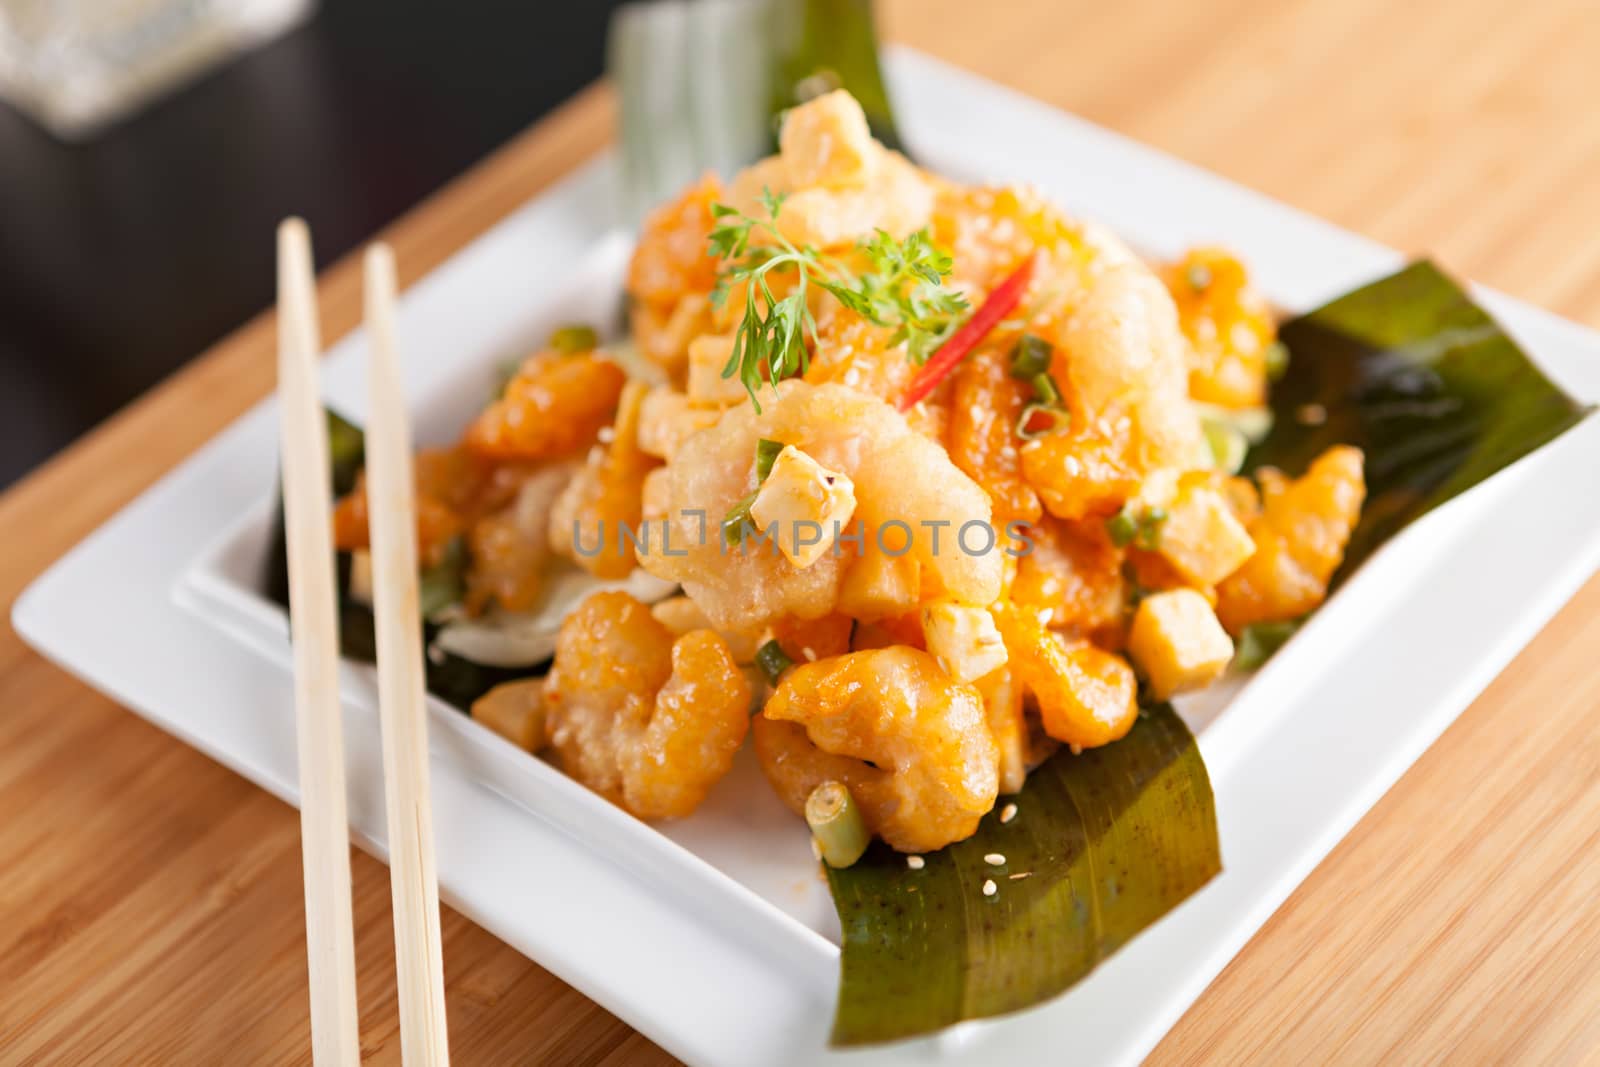 Thai crispy shrimp dish with apple and sesame seeds presented beautifully on a white square plate with chopsticks.